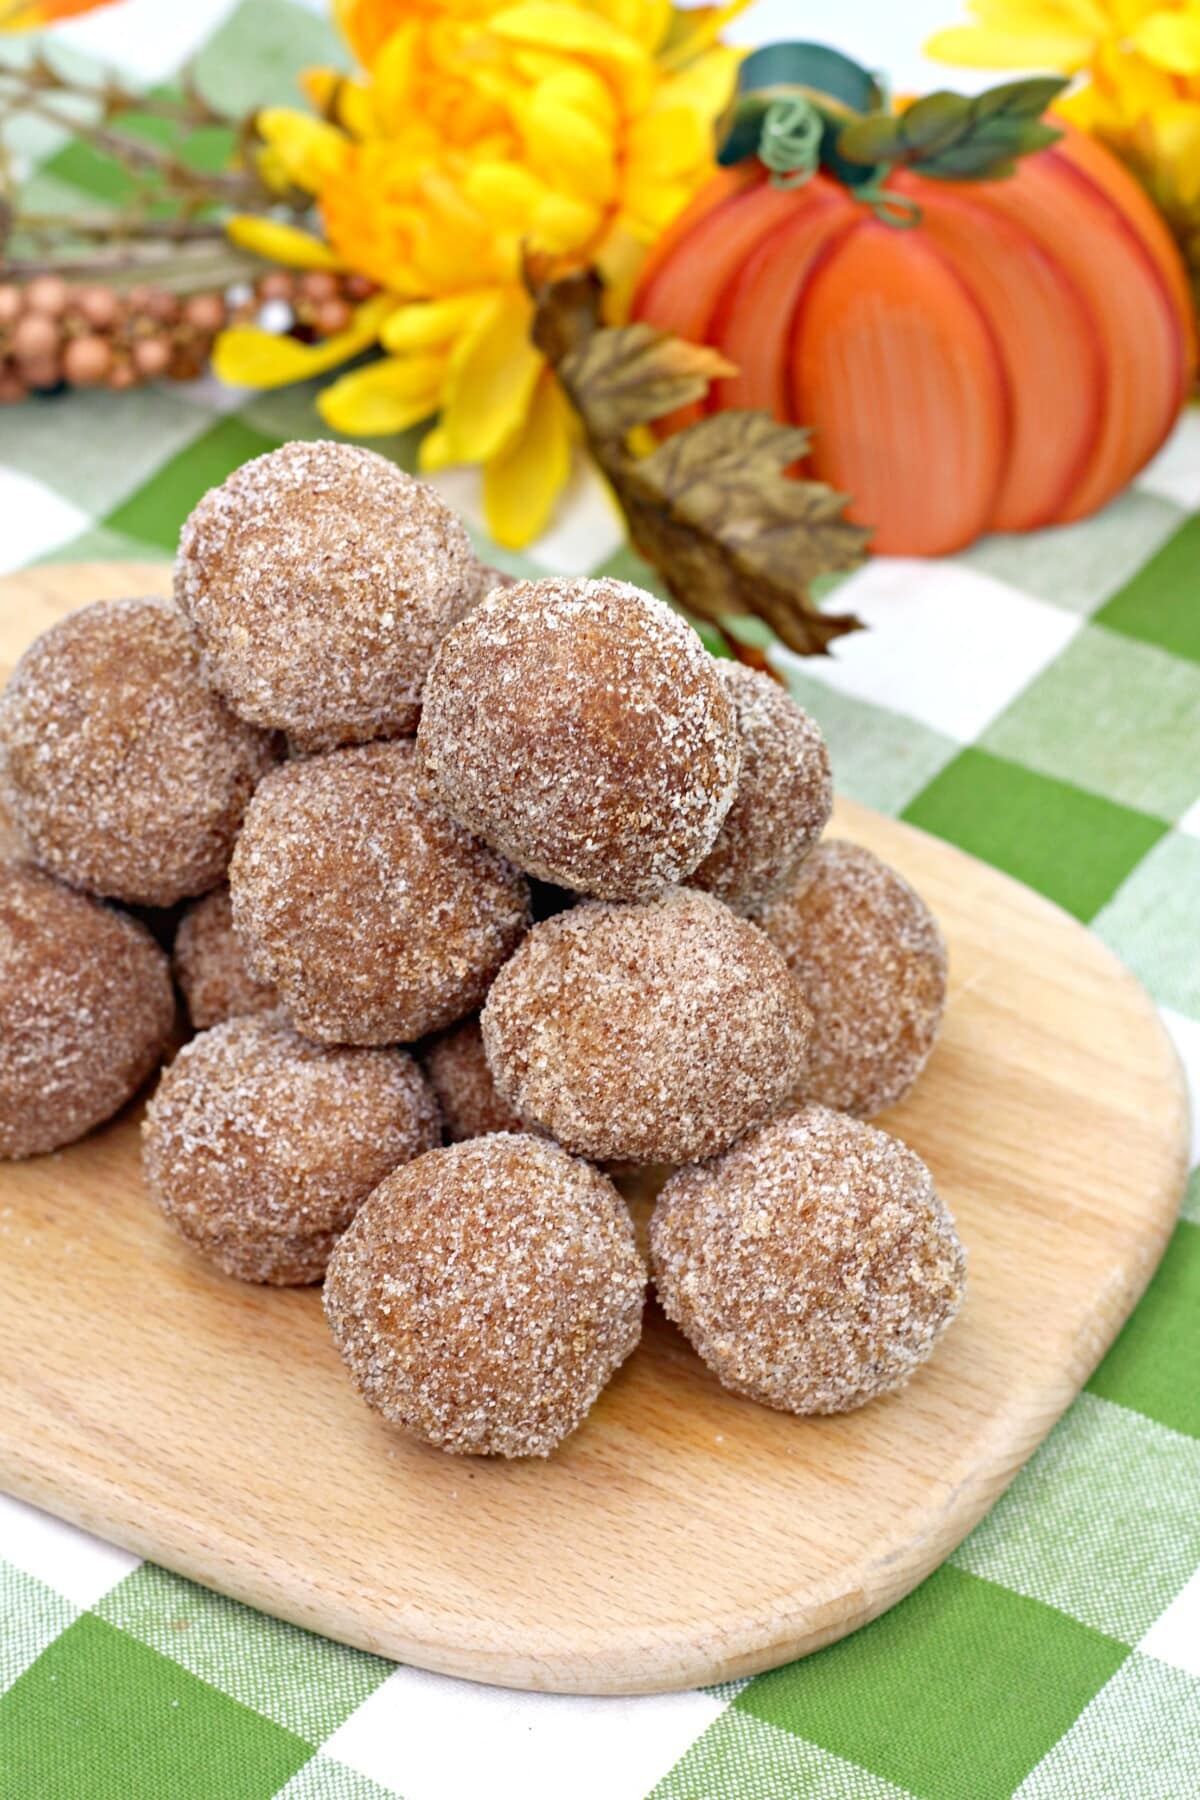 Pumpkin Donut Holes with Fall decorations in the back.